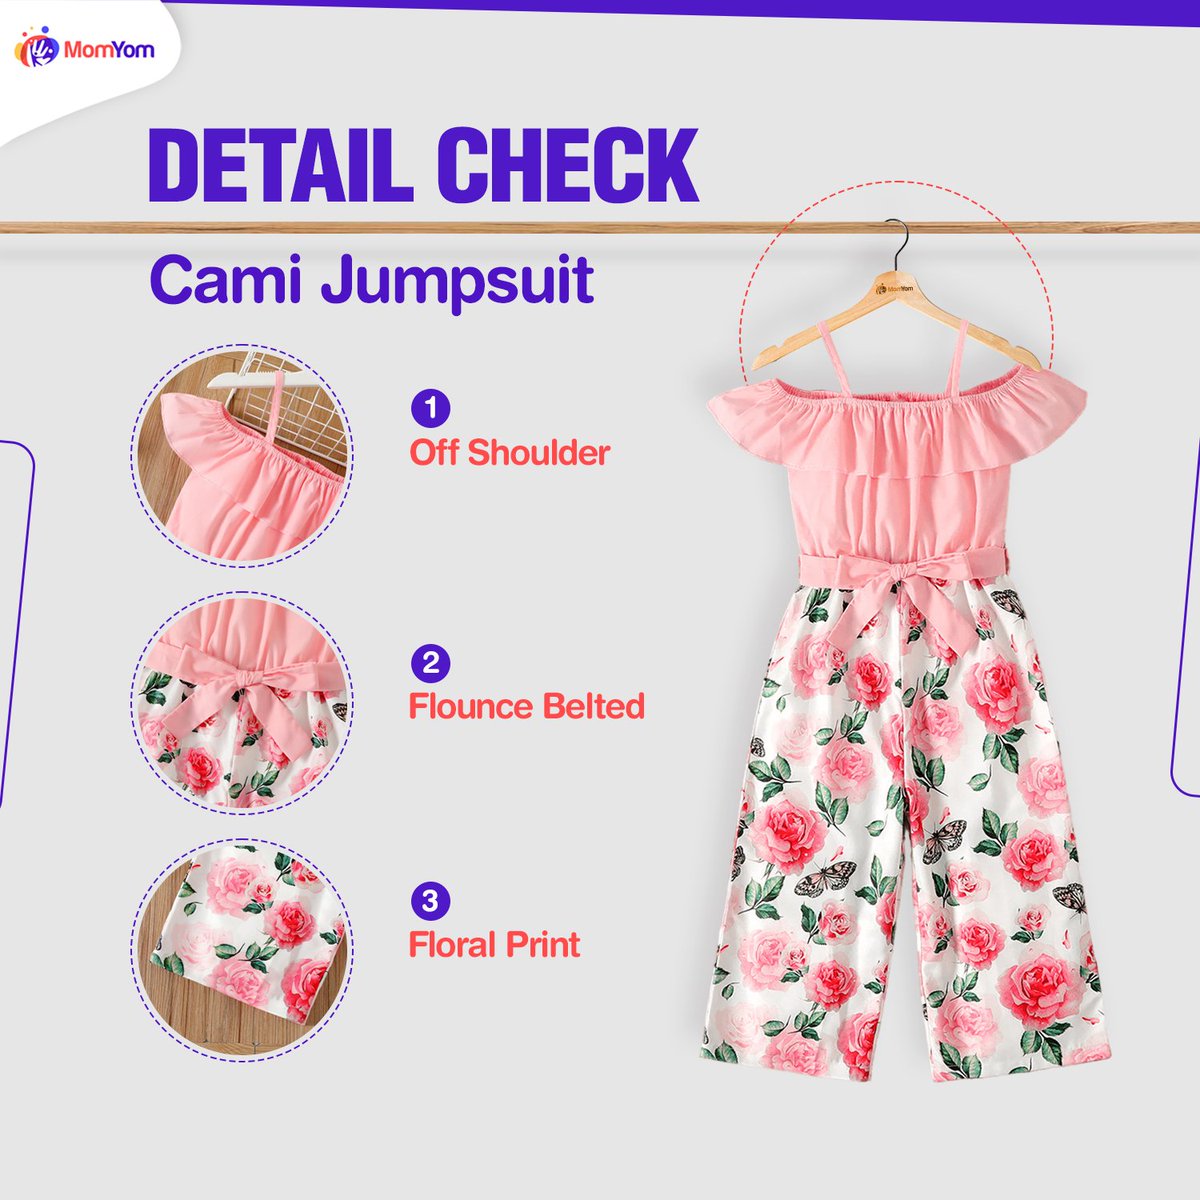 Off-shoulder cuteness with a touch of floral magic! Dress your kid in style with our cami jumpsuit. 🌸♥️
Hurry up and shop now to grab our best-seller🤗

#MomYom #Kidsapparelstore #kidsclothing #kidsapparel #kidsbrand #BestSeller #kidsjumpsuit